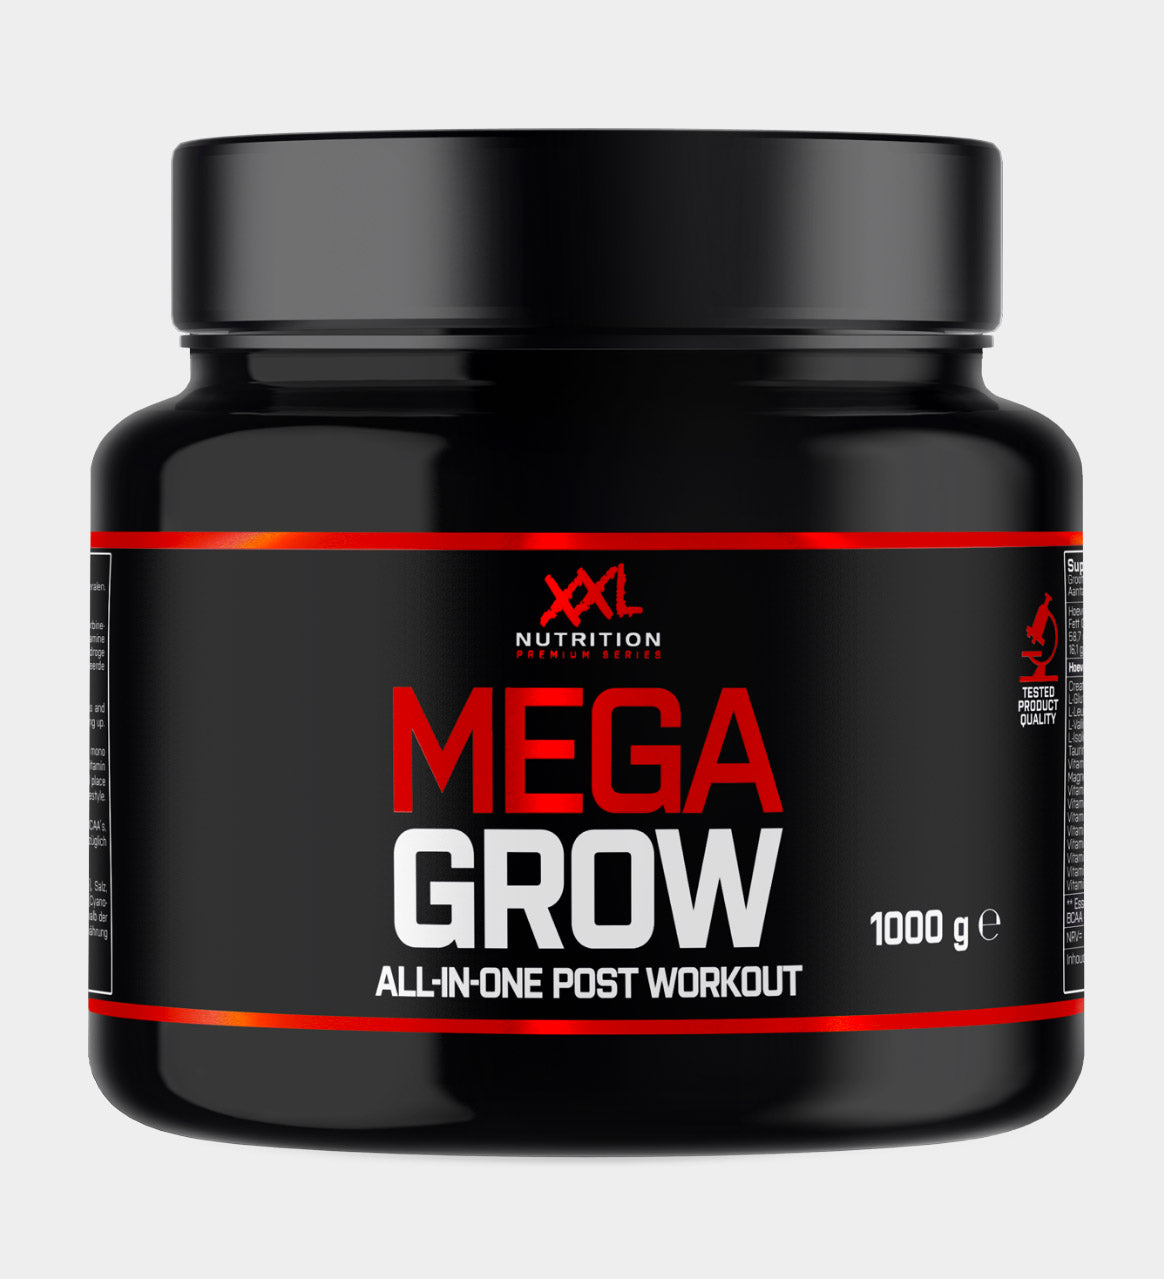 XXL Nutrition - Mega Grow Post Workout - Booster Fight Store